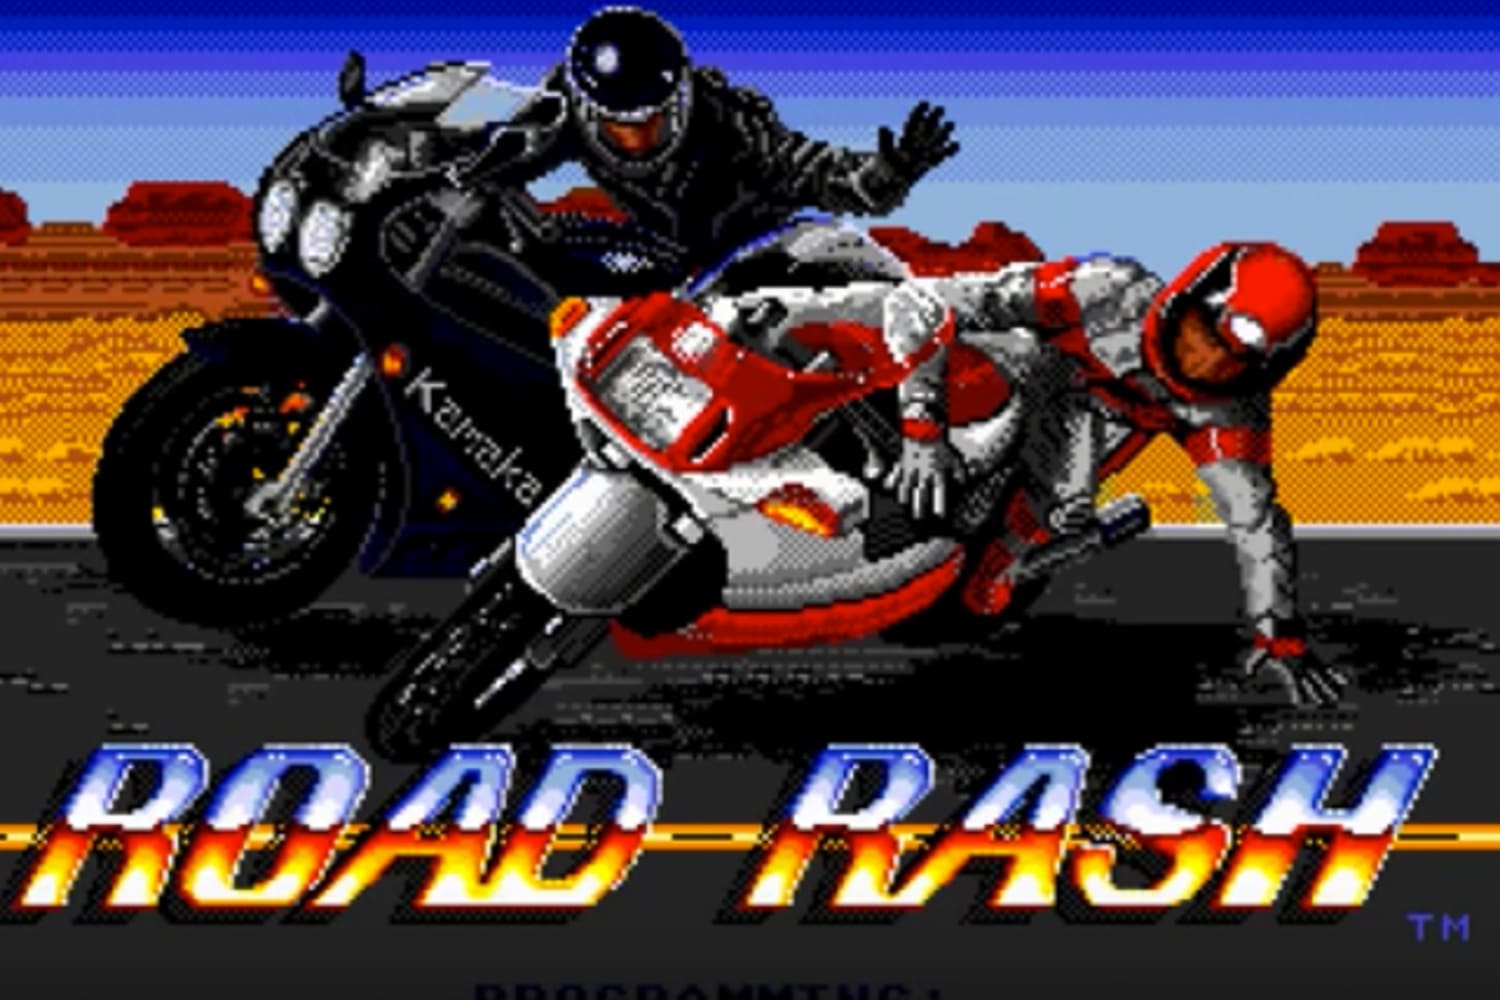 The best motorcycle racing video games listicle